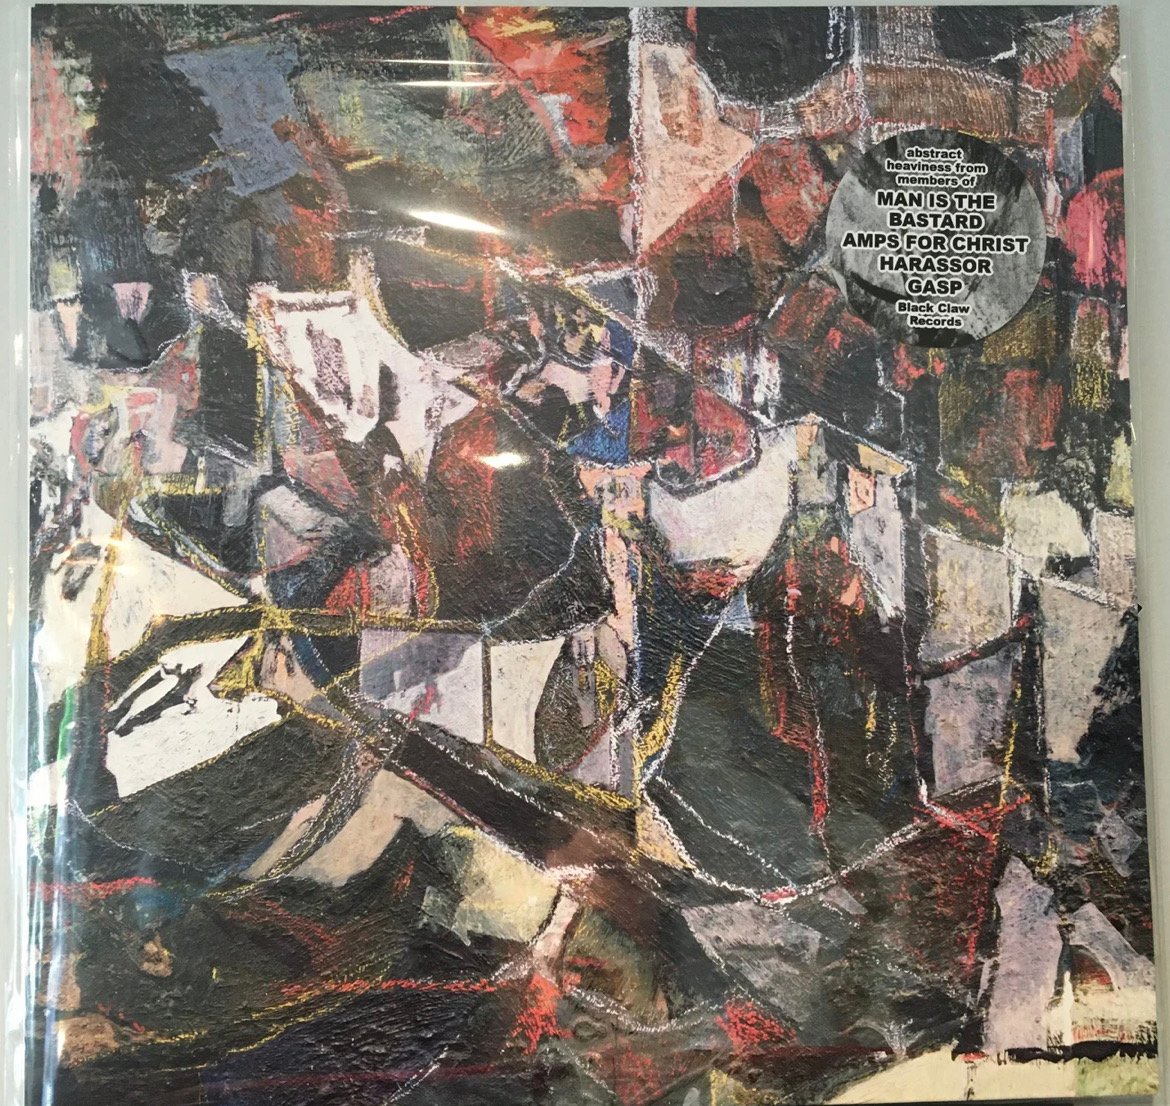 Image of Bastard Collective / Mike Meanstreetz "split" LP